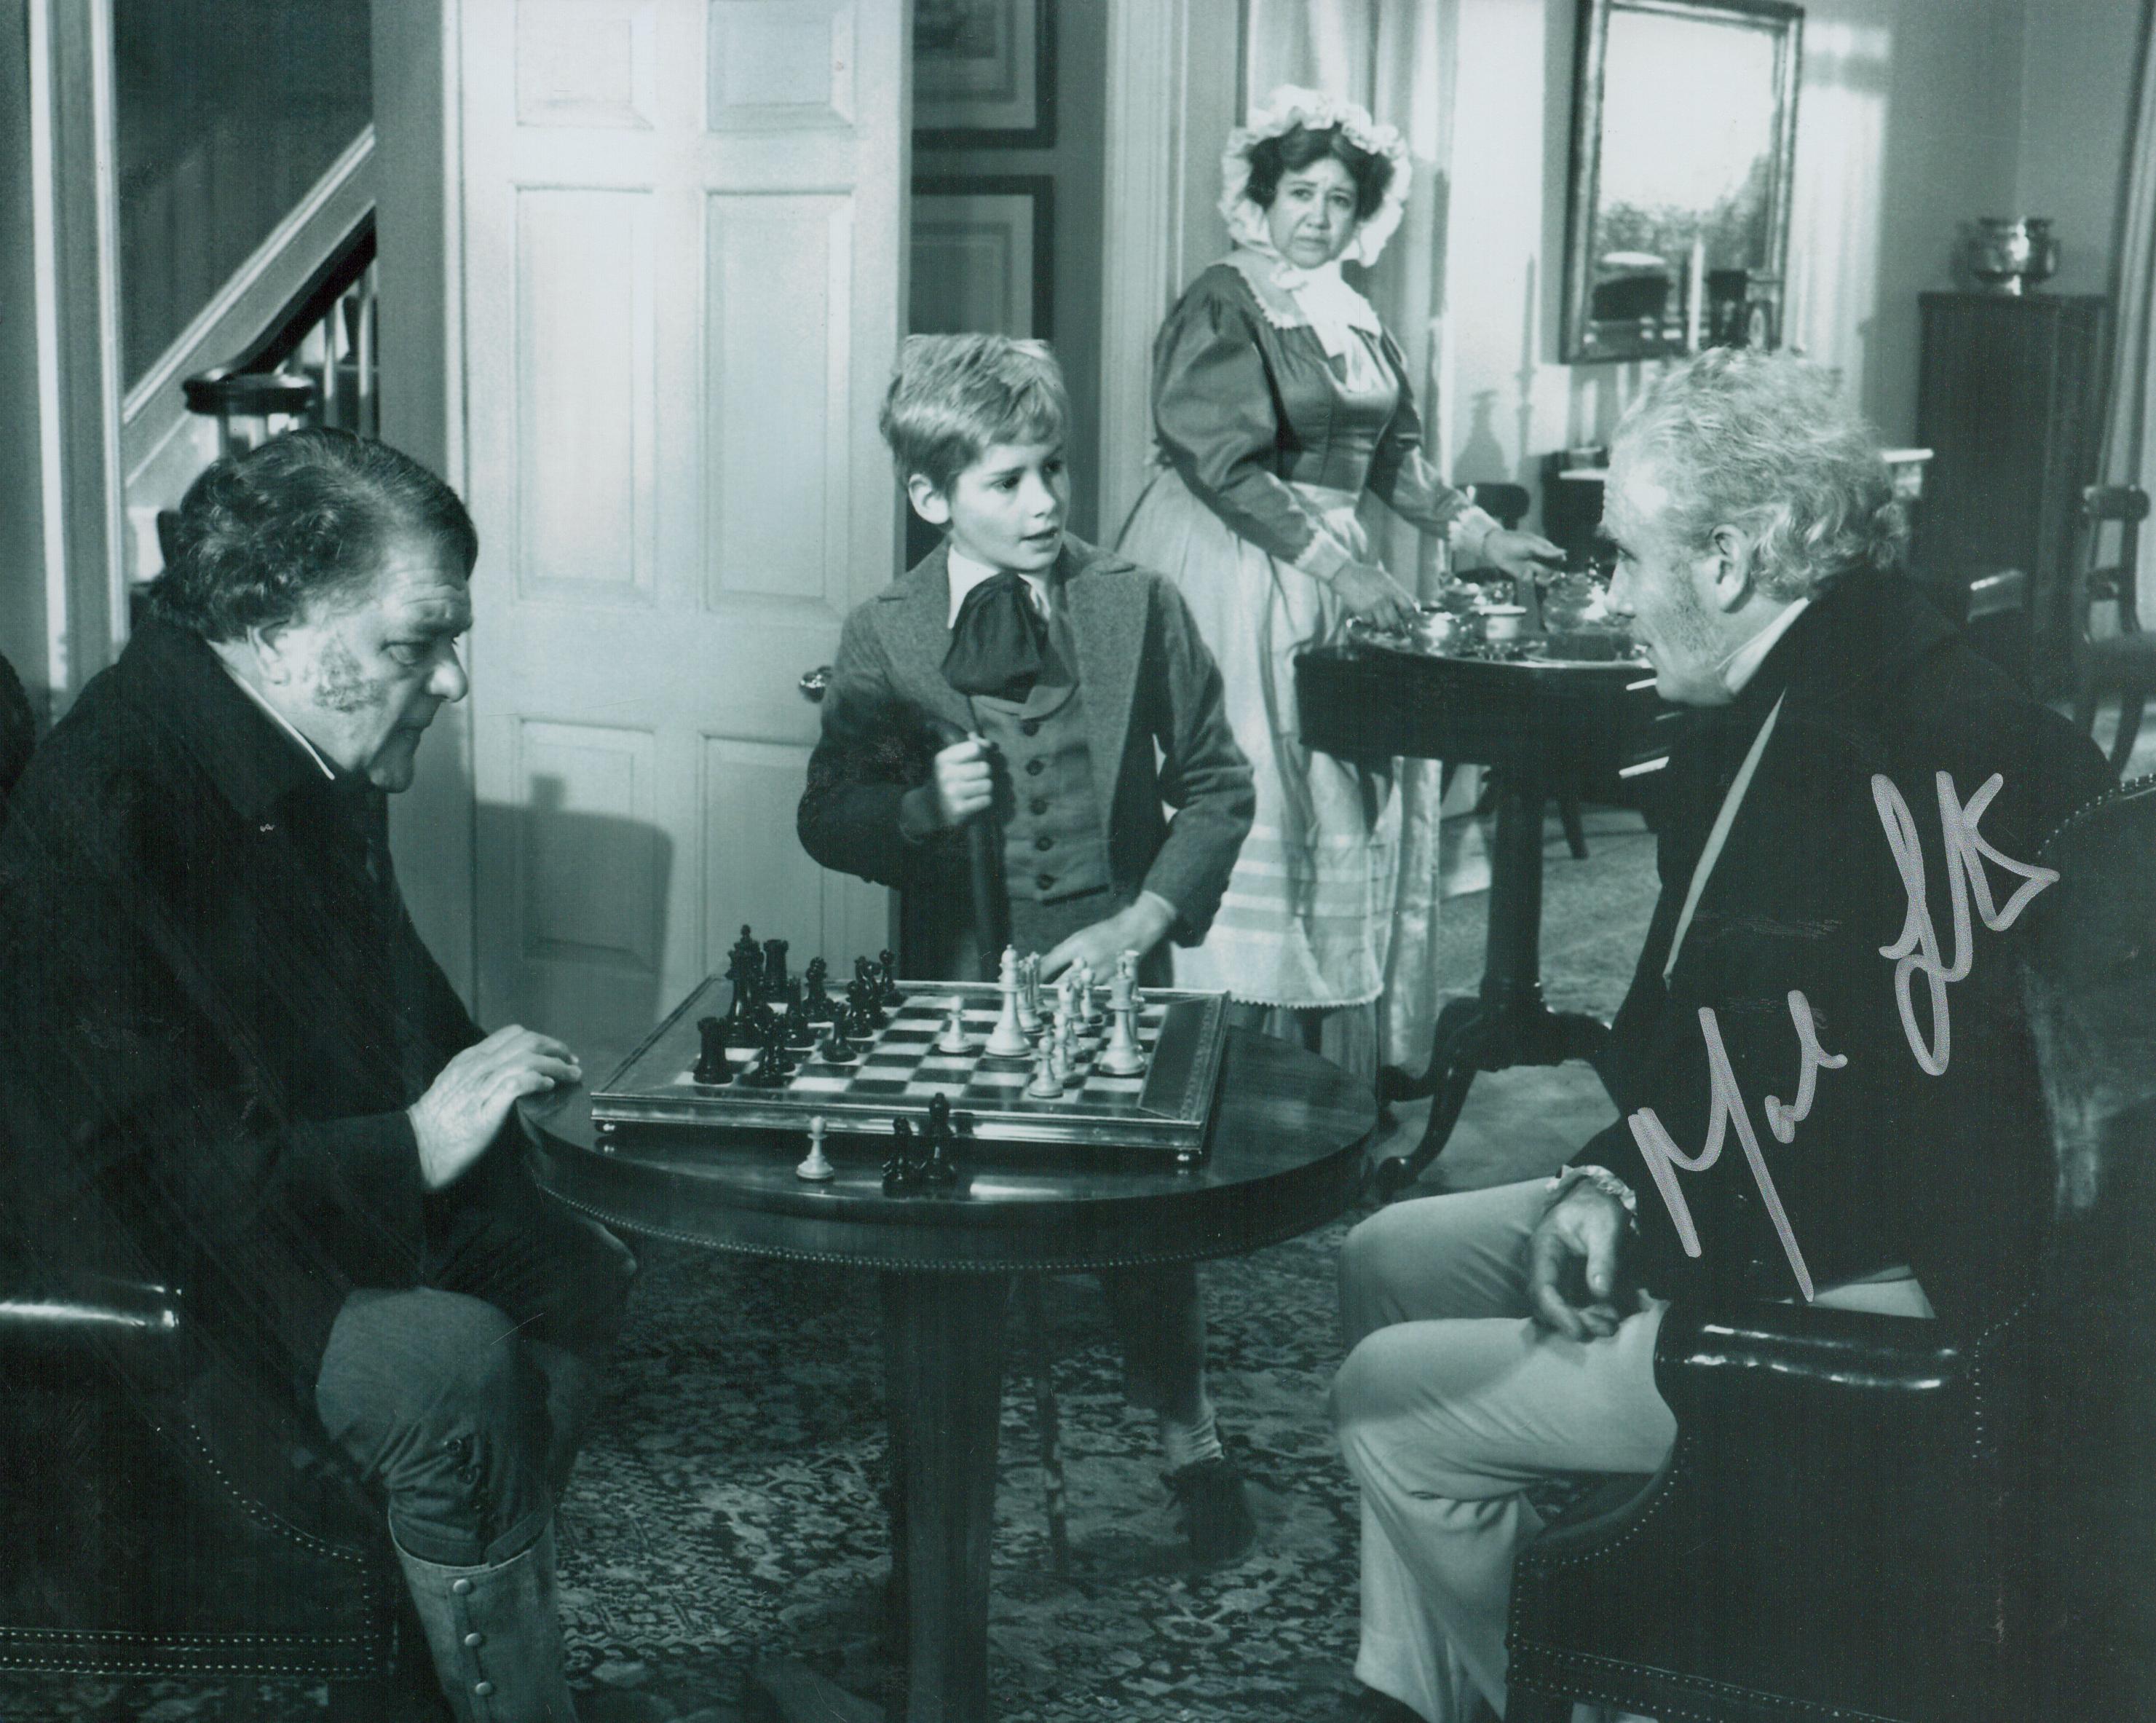 Mark Lester signed Oliver 10x8 inch black and white photo. Good condition. All autographs are